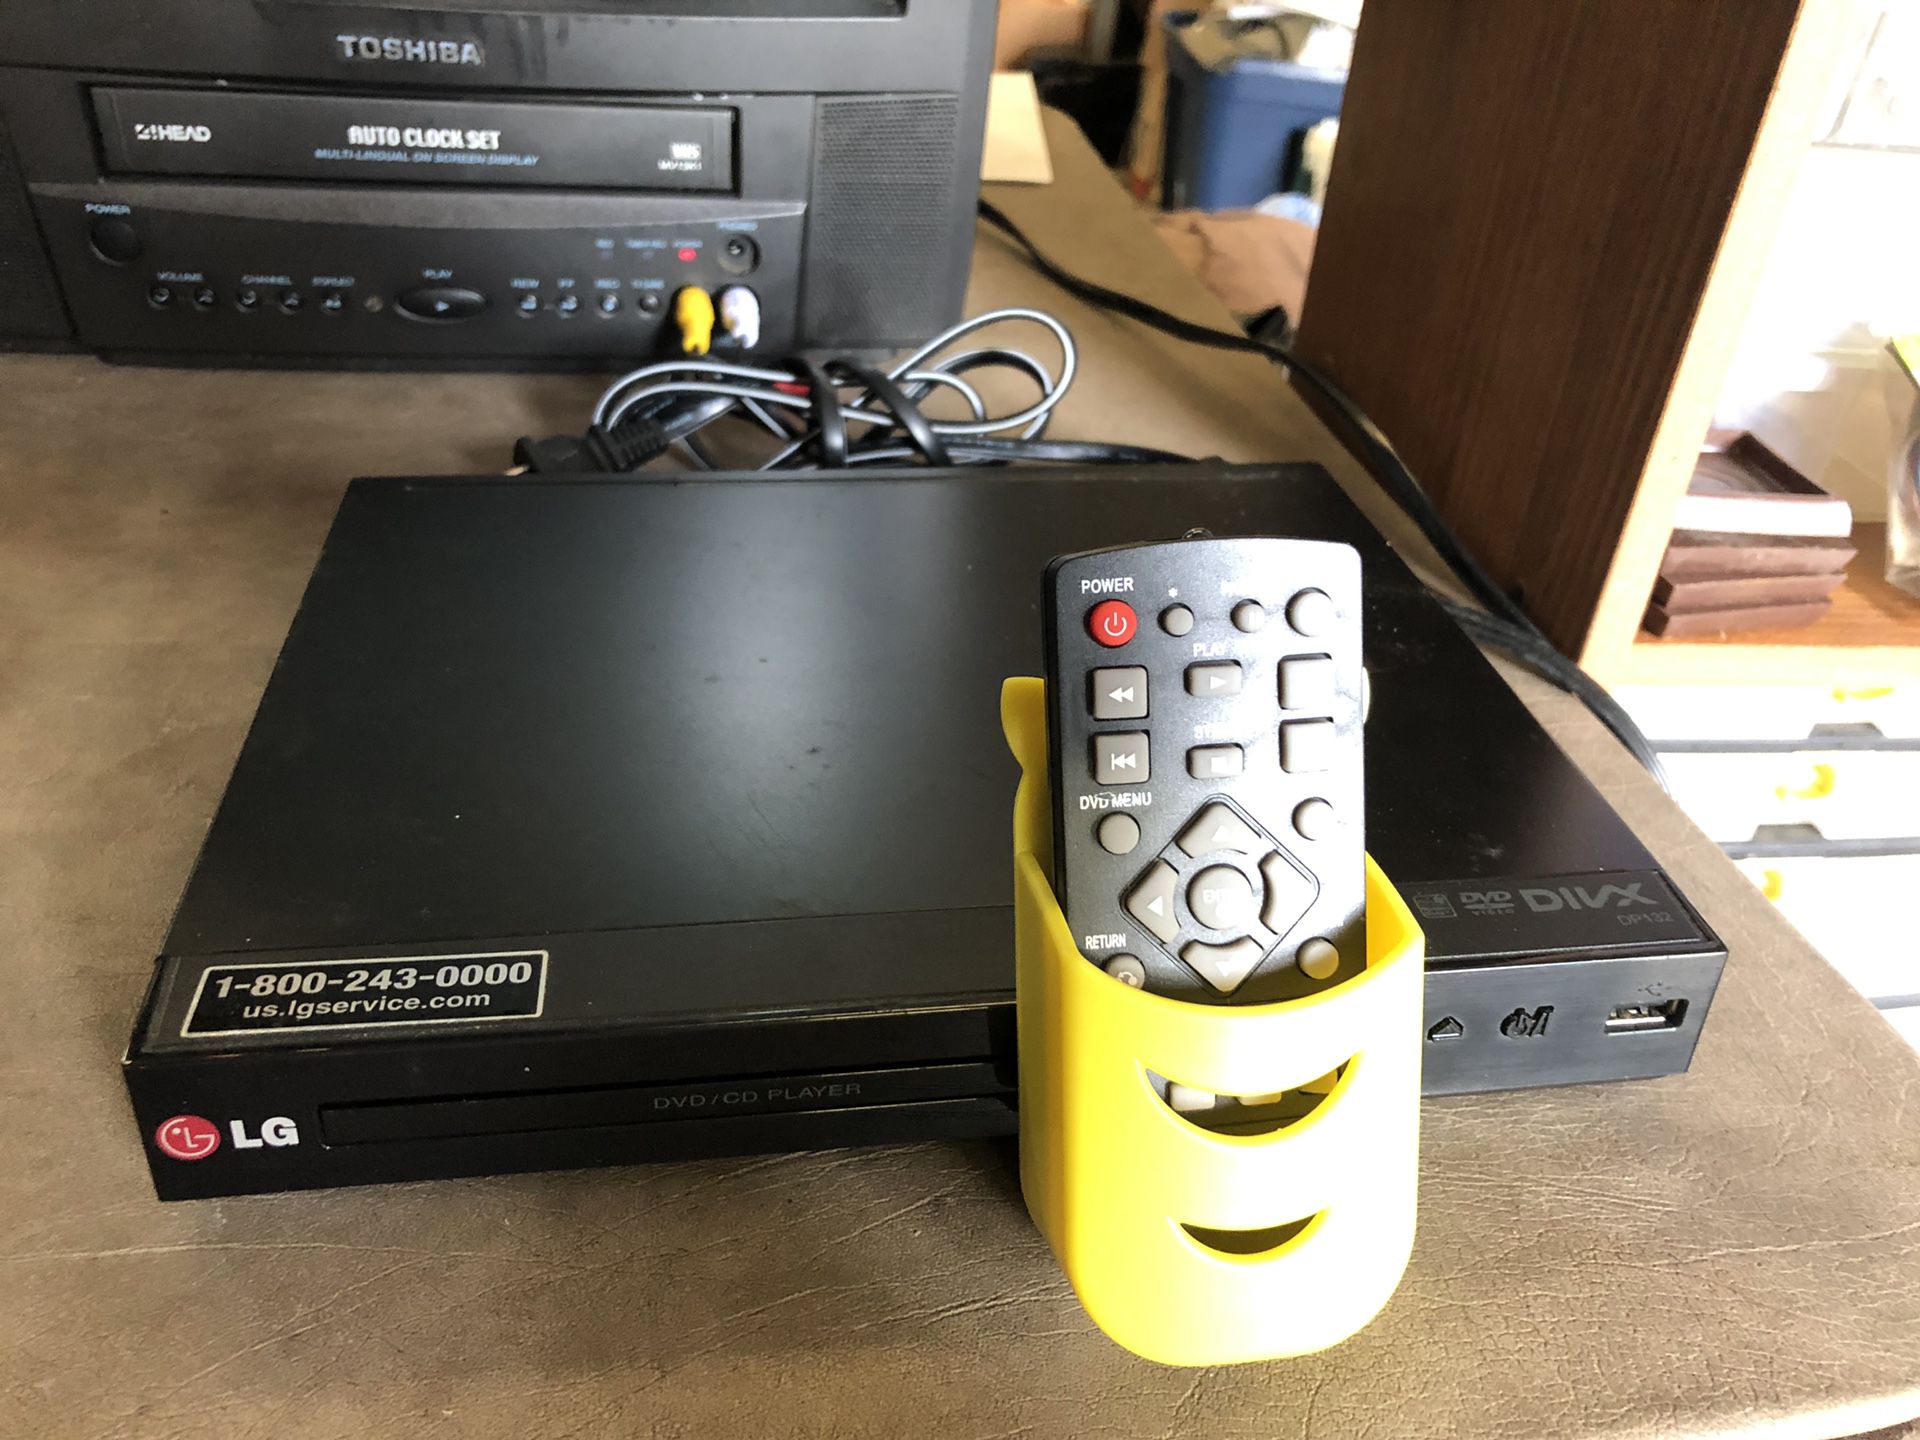 LG DVD/player with new remote